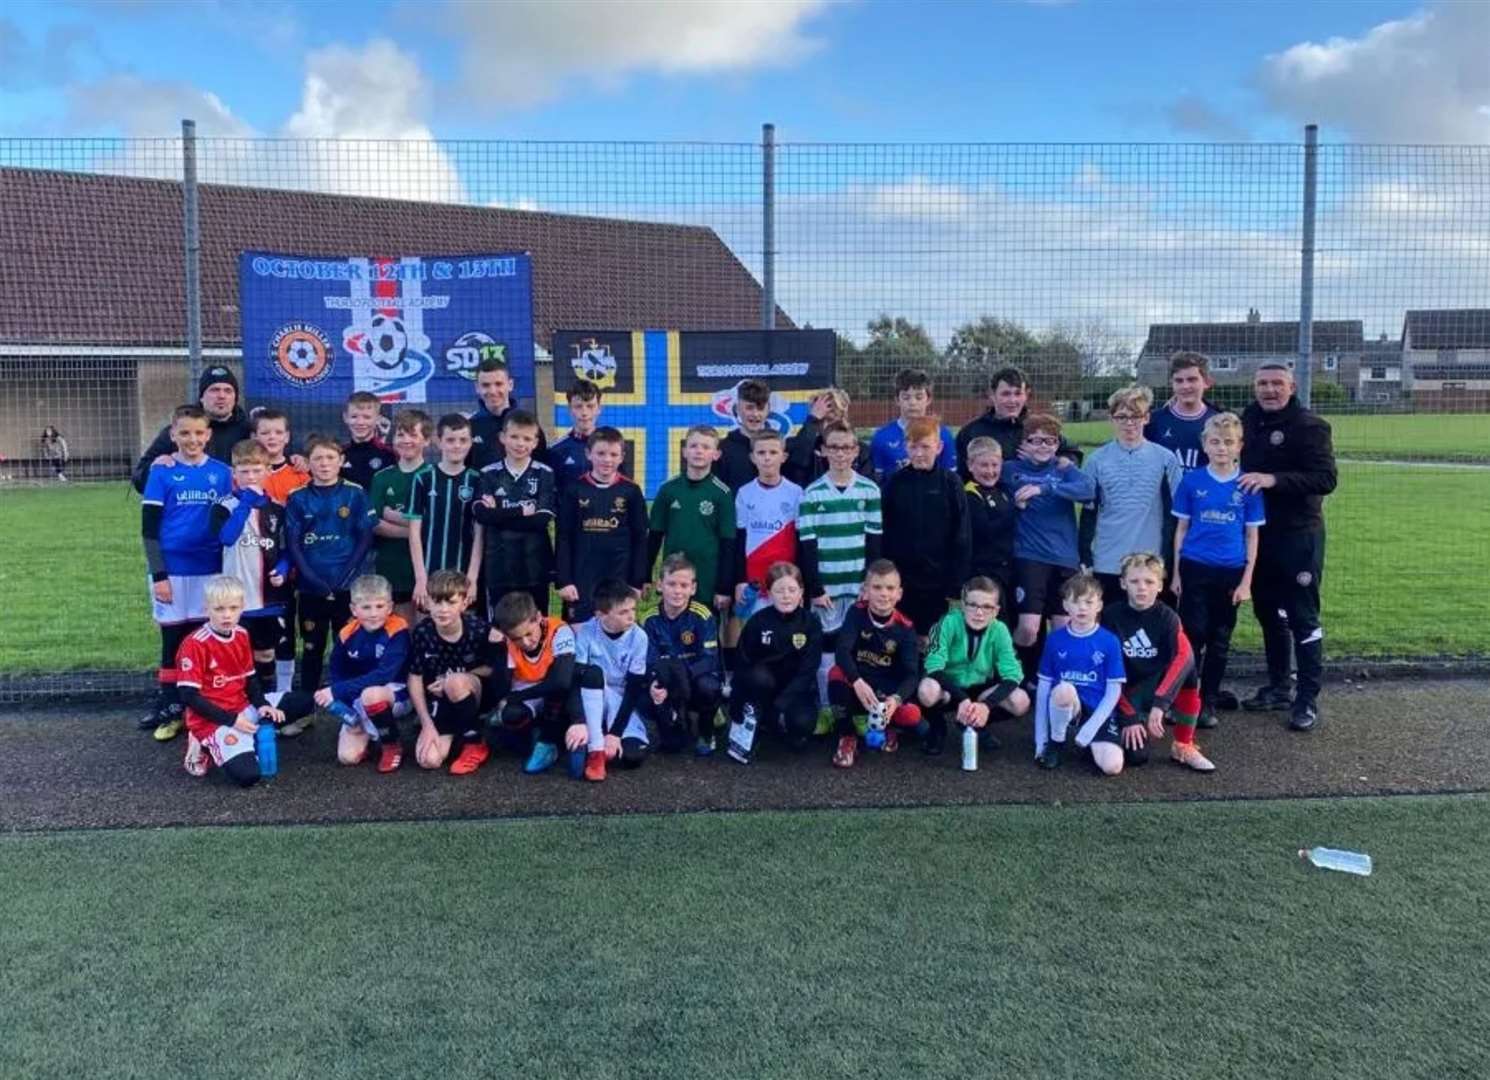 The older age group (10-15) at their session with Simon Donnelly and Charlie Miller at the Naver all-weather pitch in Thurso.